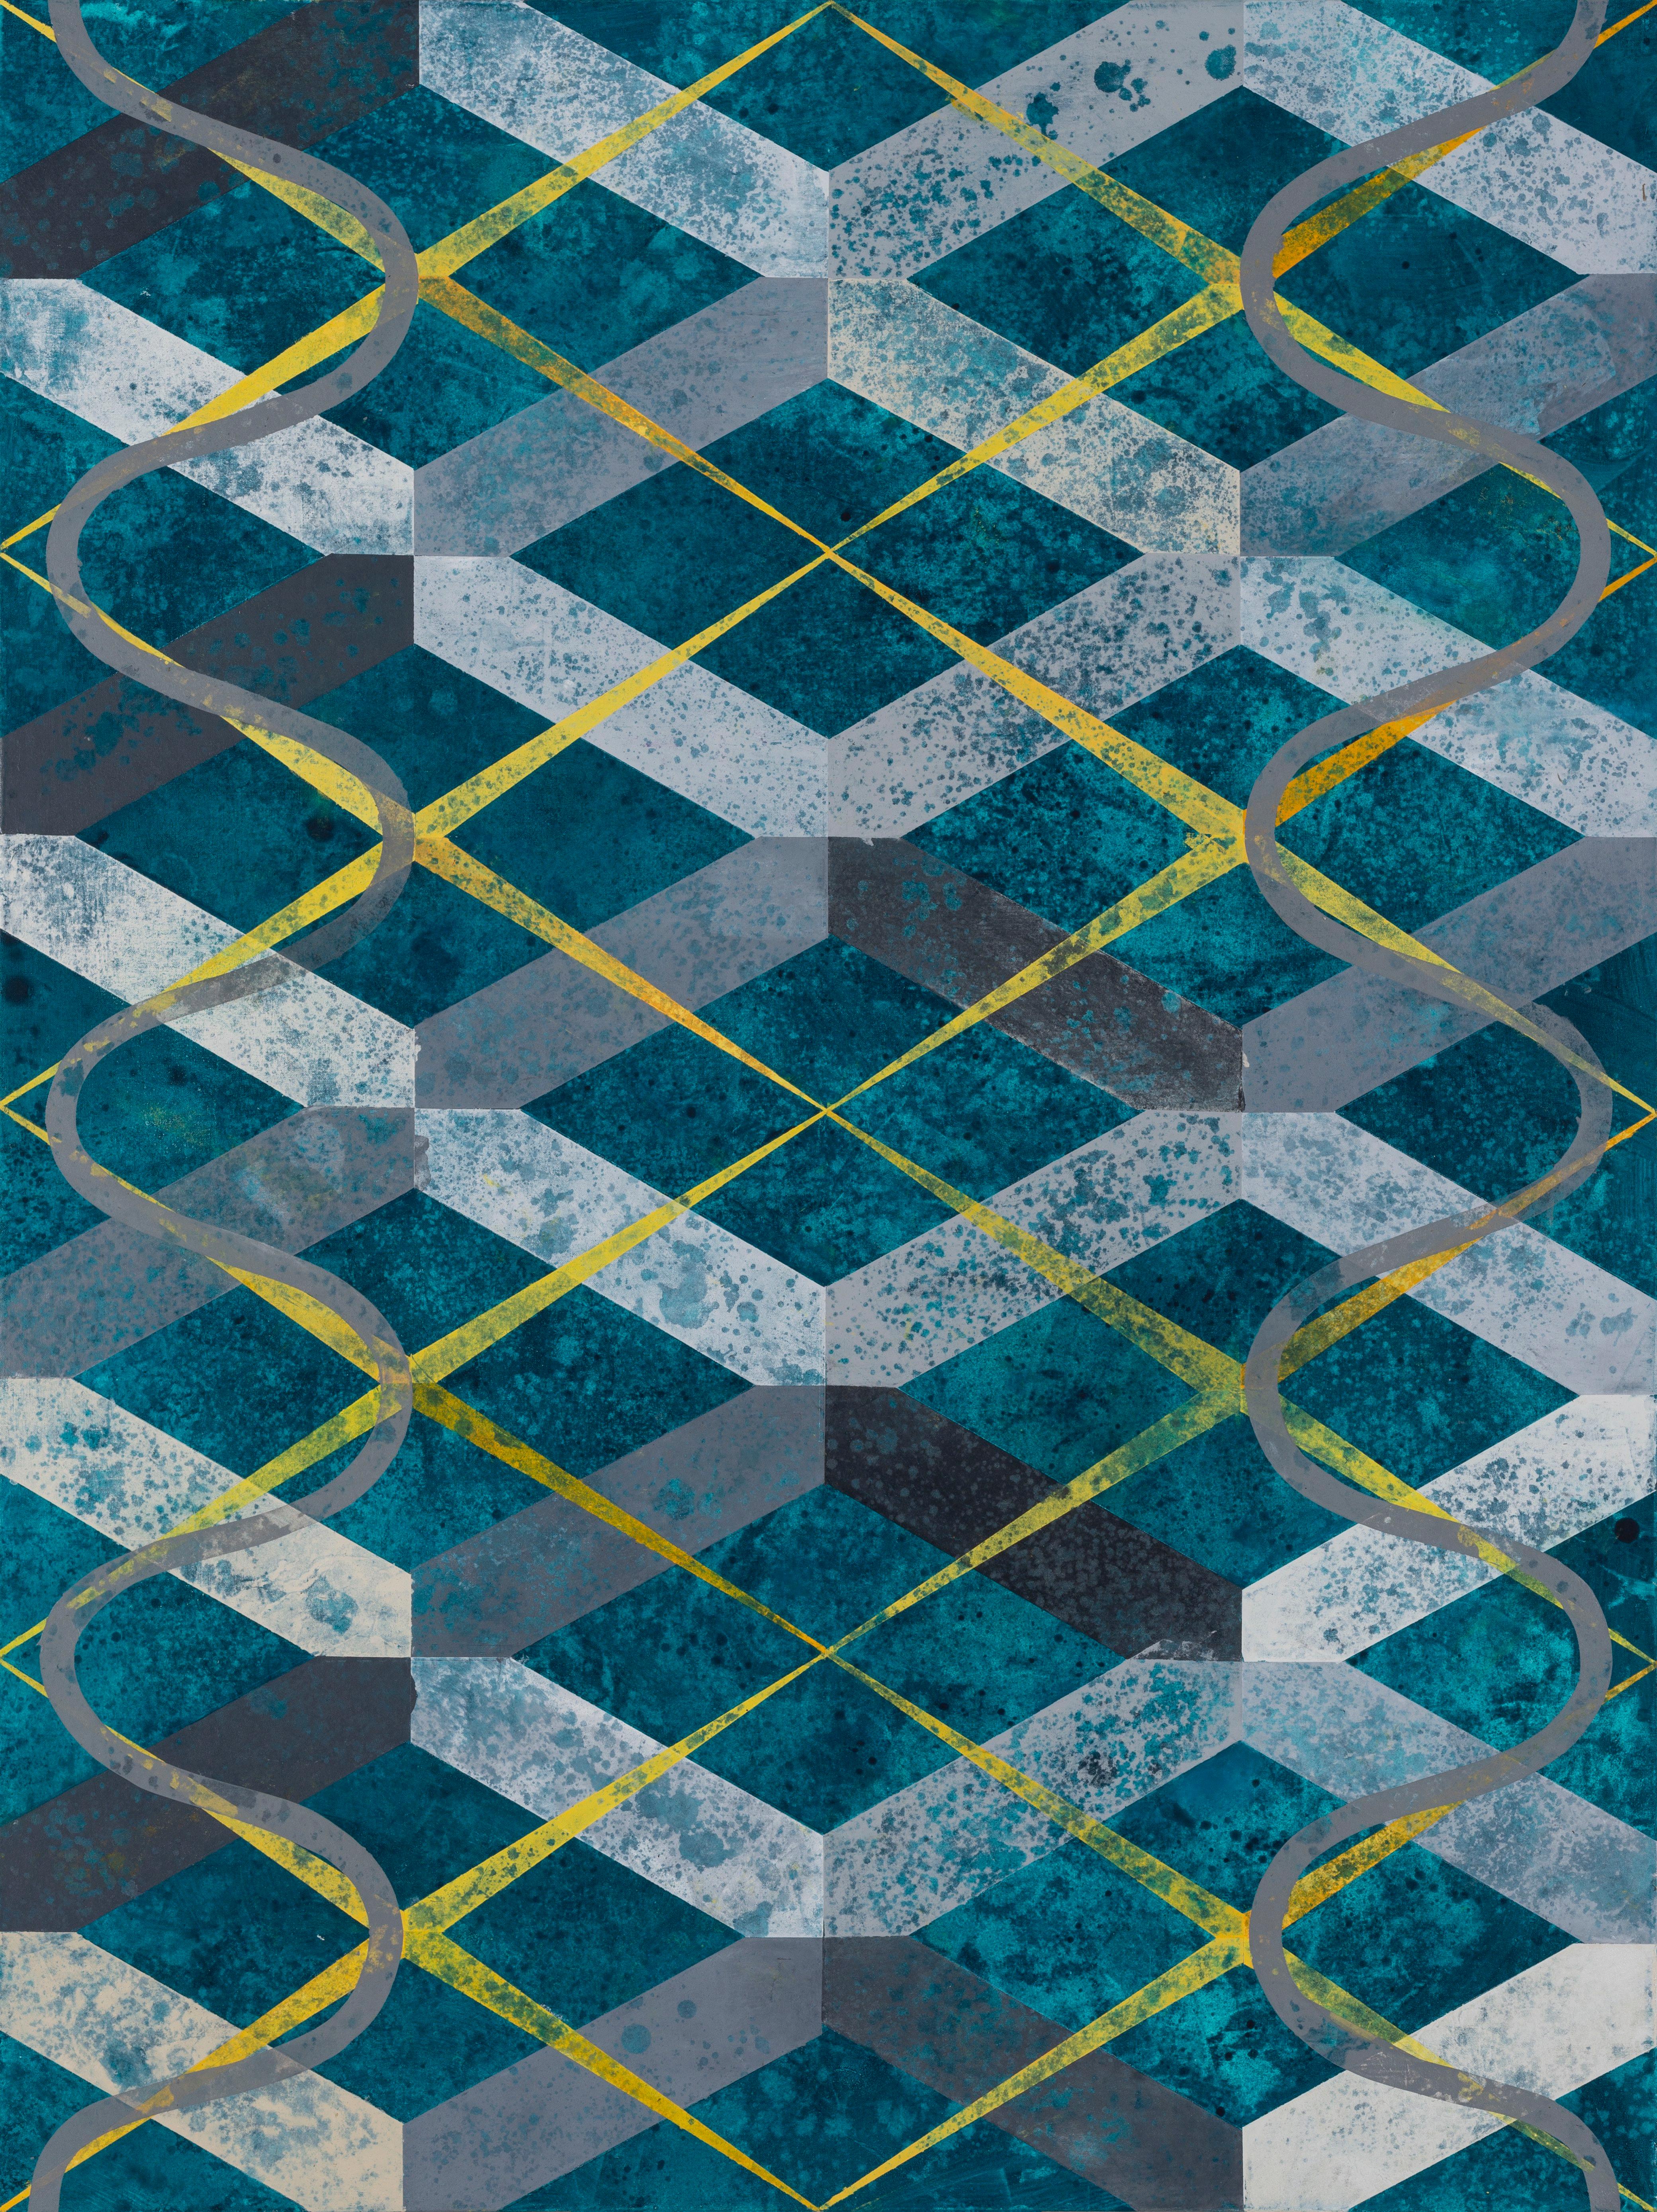 Mary Judge Abstract Painting - Dream of a River to the Sea, Turquoise Blue, Yellow Geometric Abstract Pattern